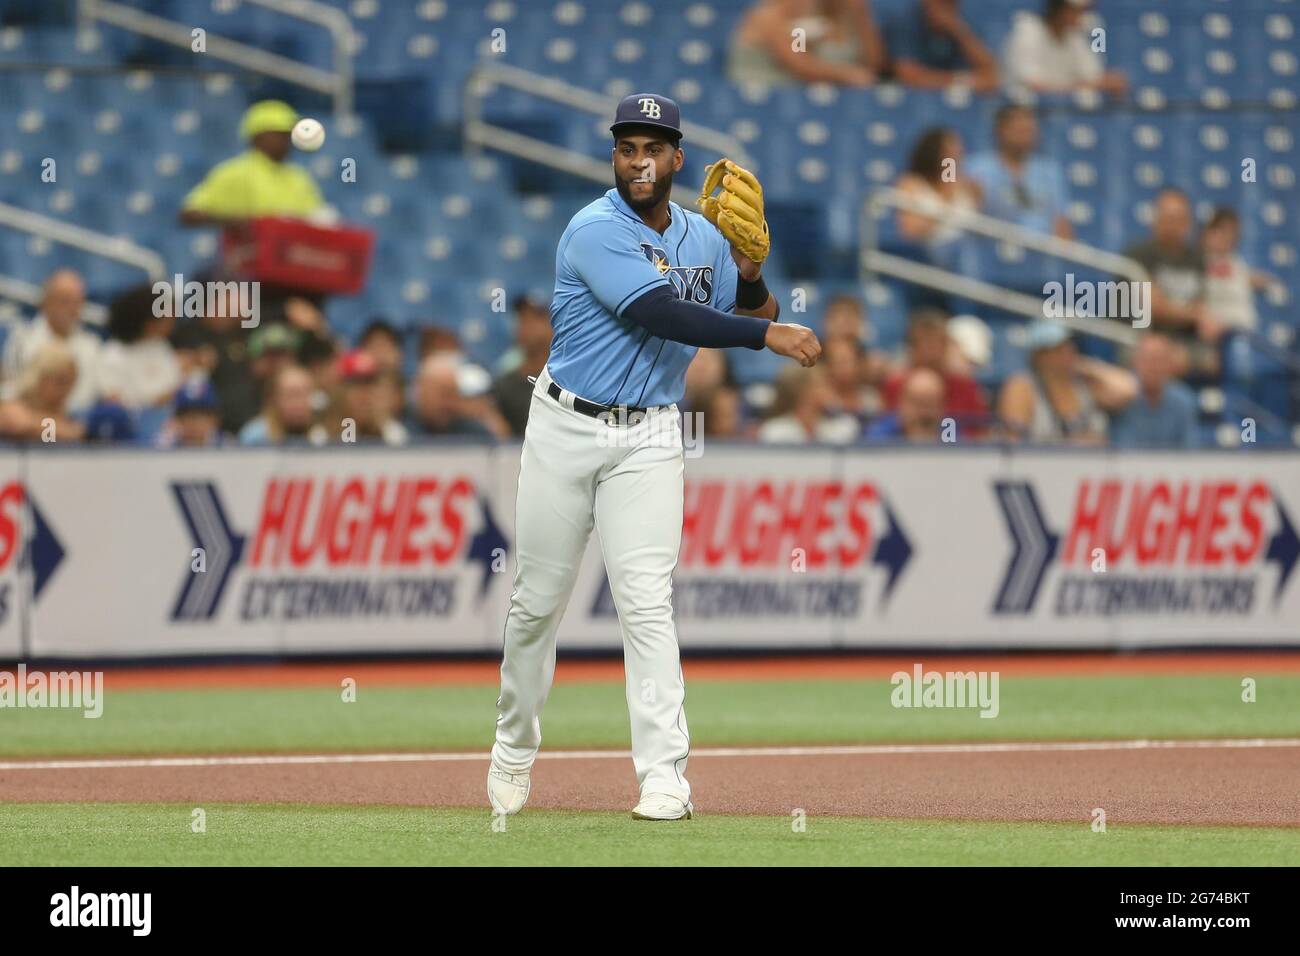 Rays 1B Yandy Díaz leaves game with right hamstring tightness - The San  Diego Union-Tribune